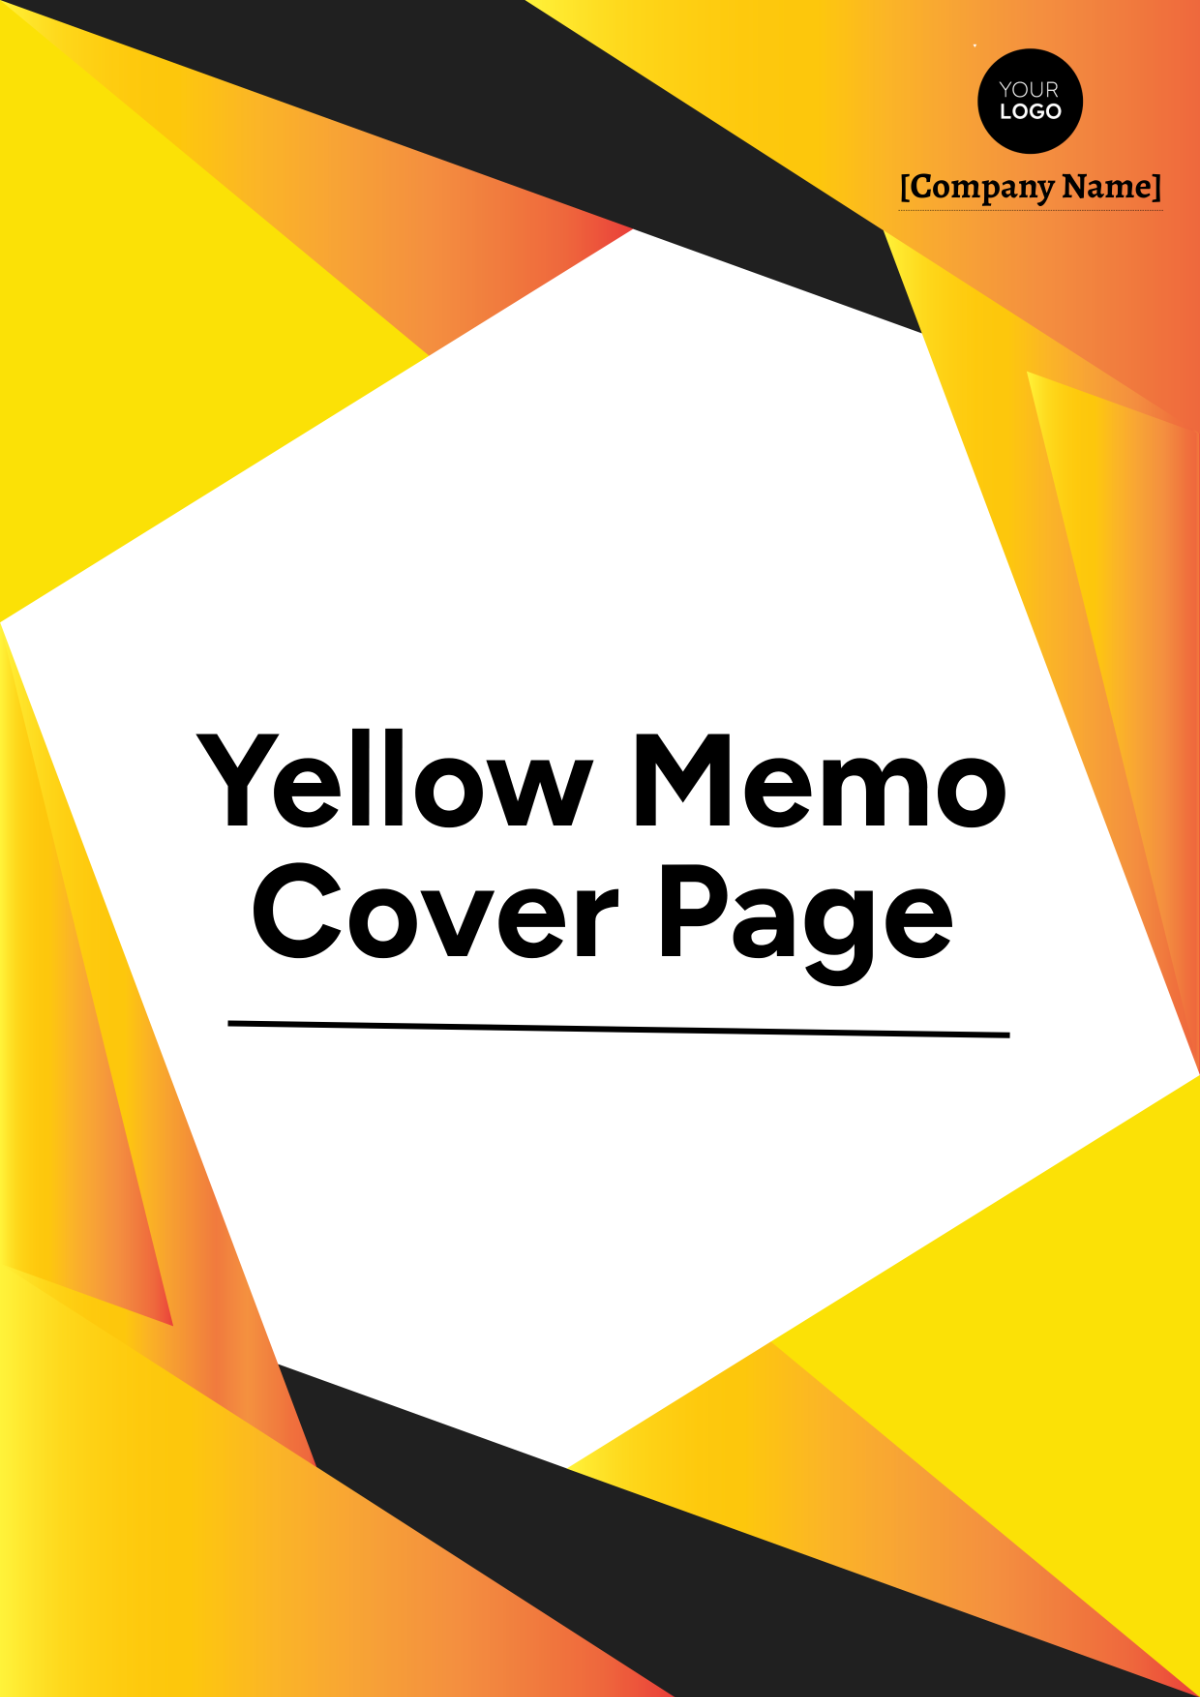 Yellow Memo Cover Page Template